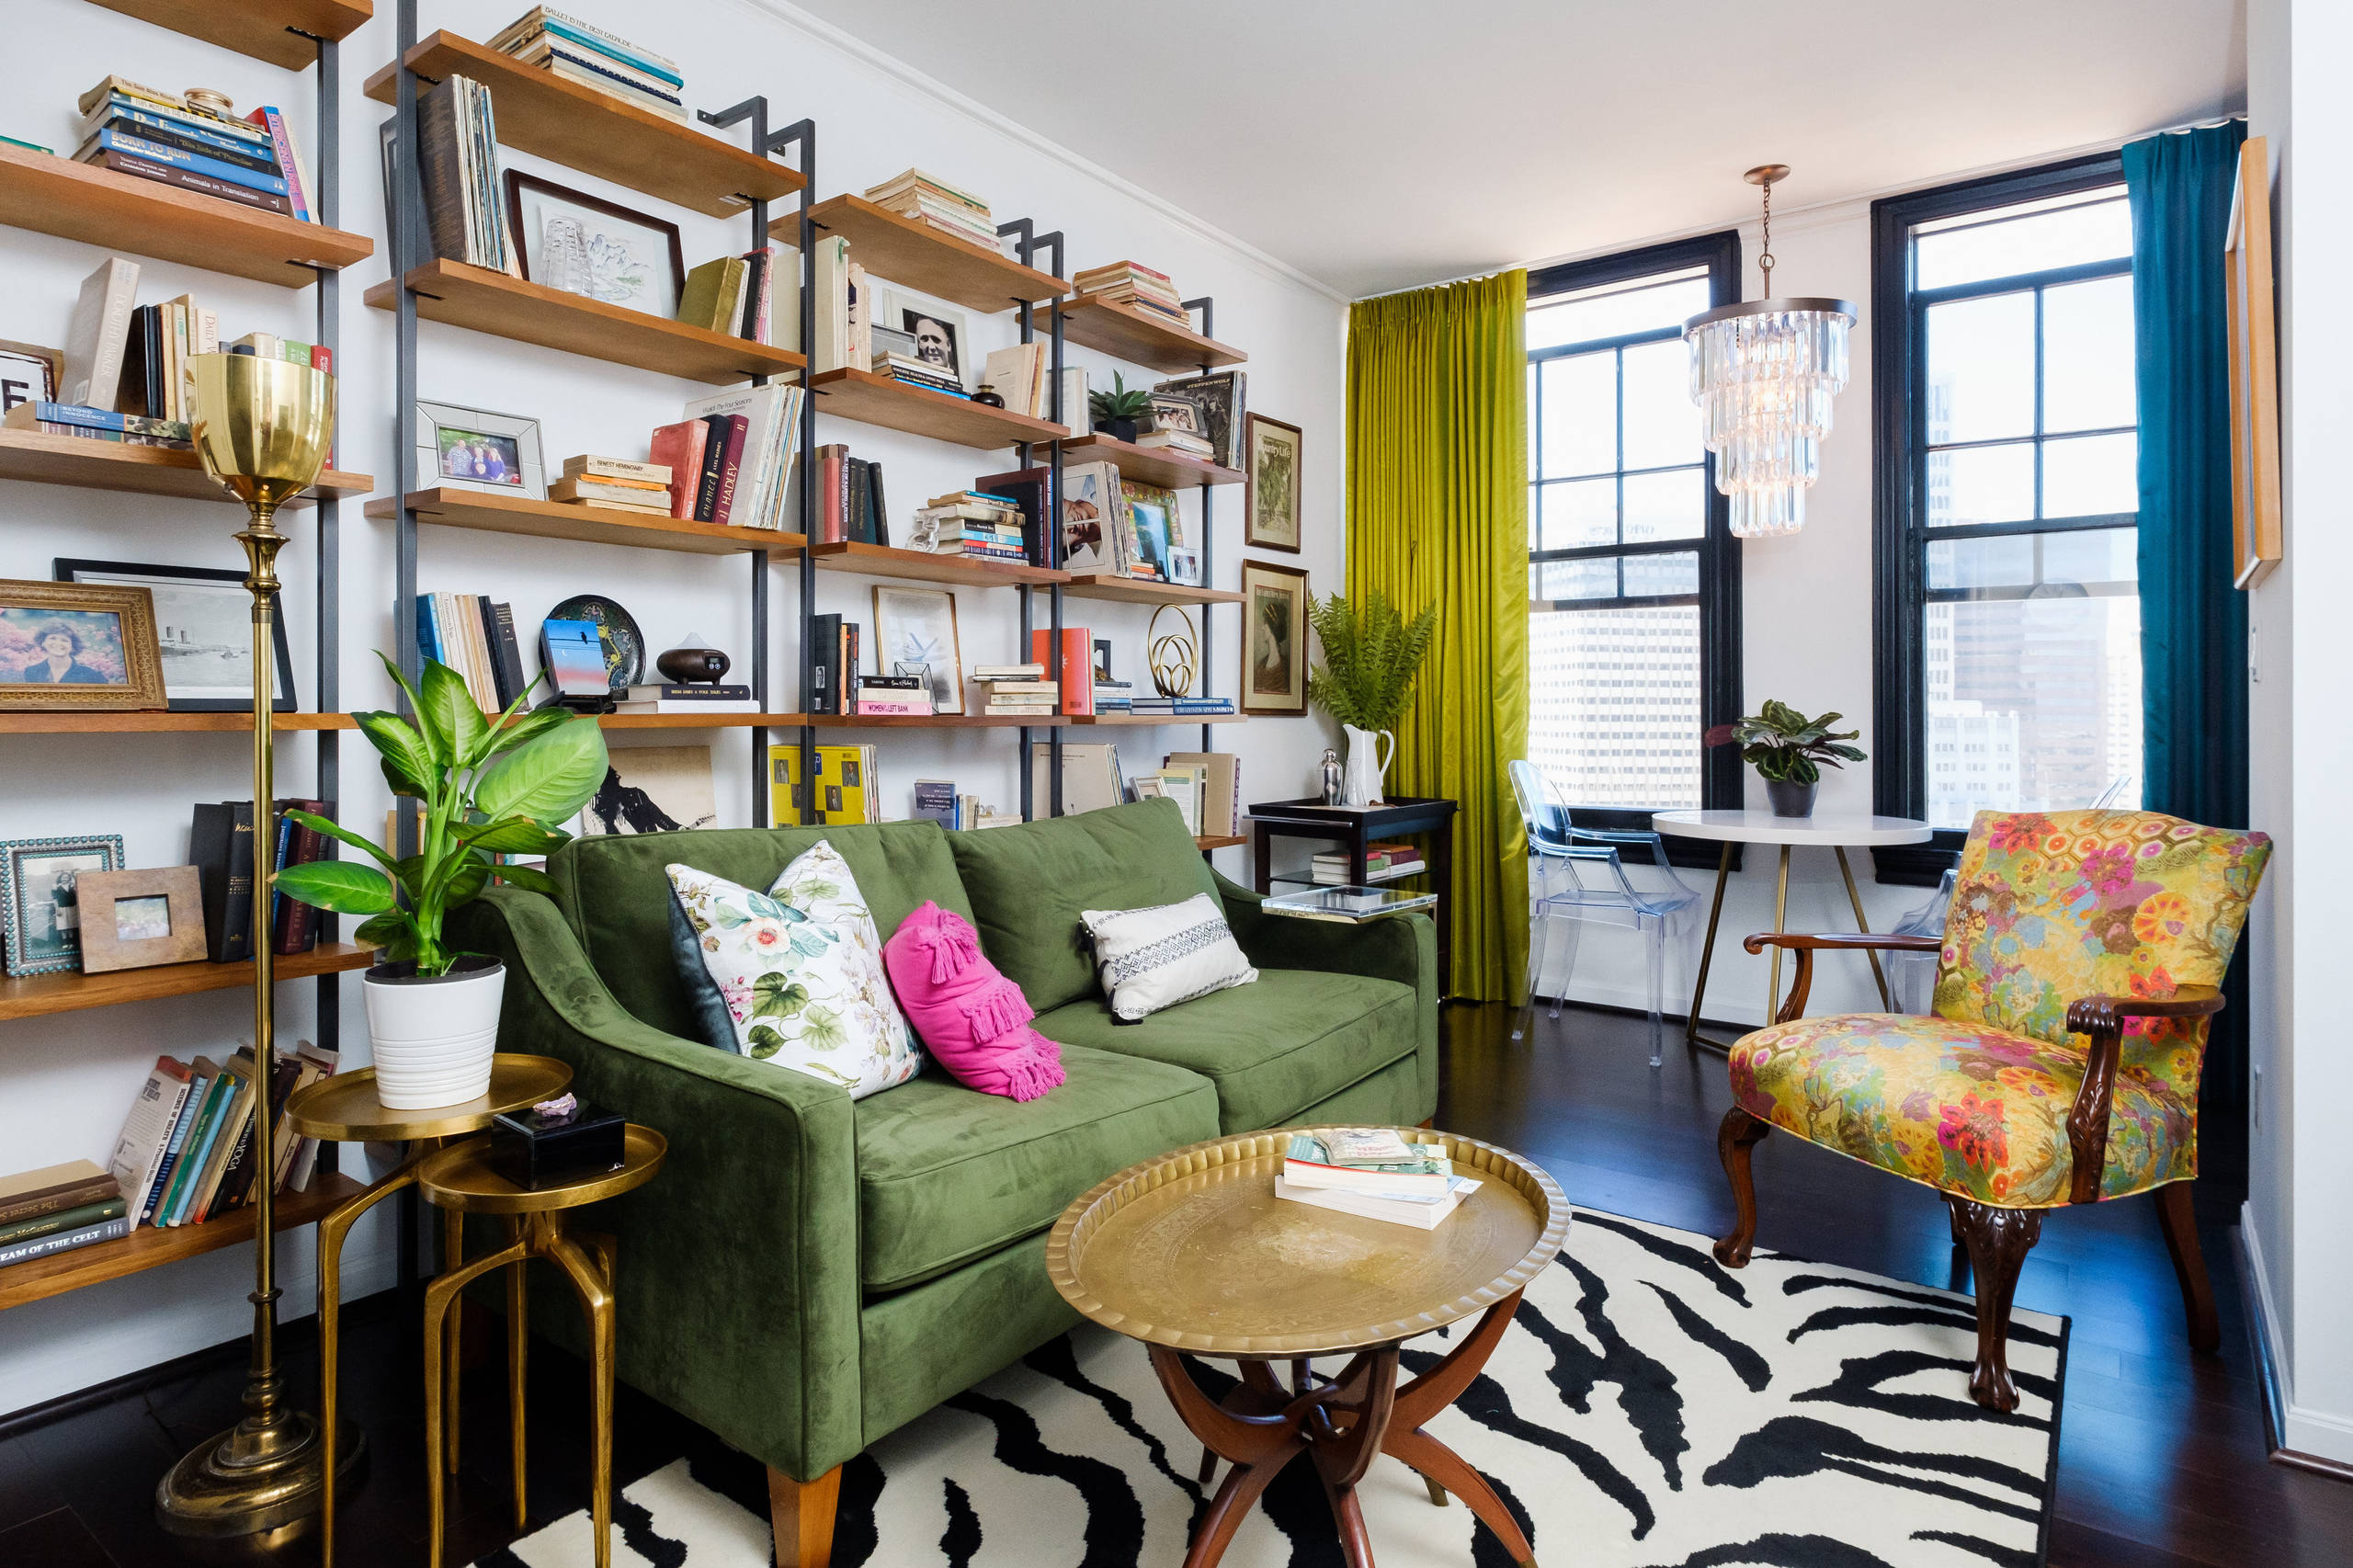 Colorful Downtown San Diego Condo Small Space - Living Room - Eclectic -  Family Room - San Diego - By Danielle Interior Design & Decor | Houzz